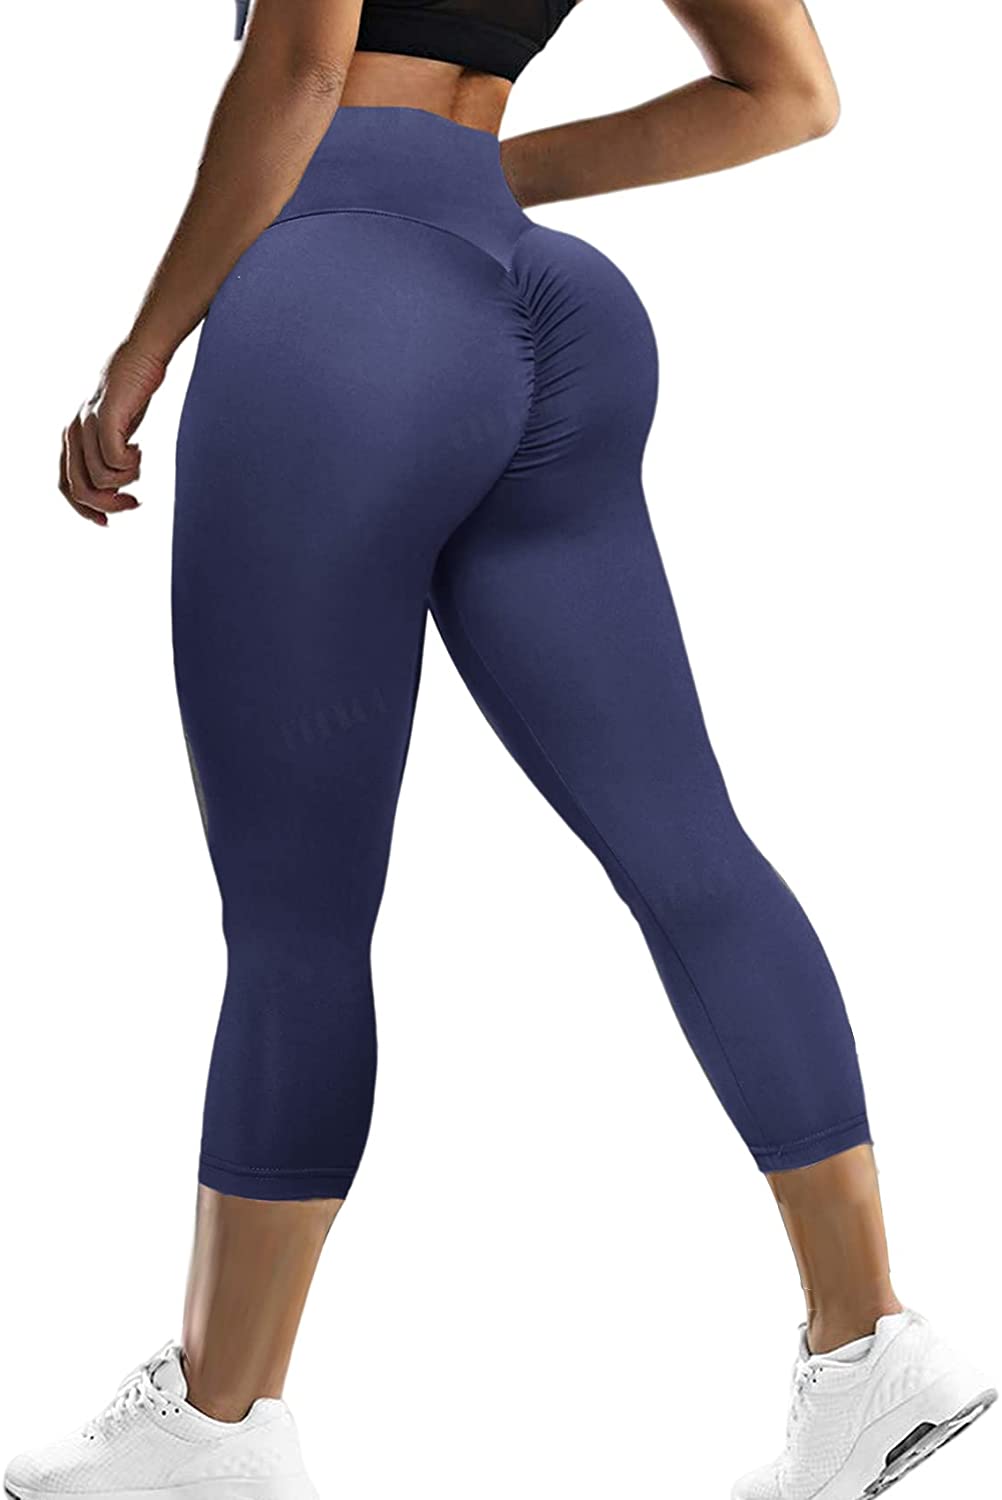 Sexy Butt Sports Leggings Women Yoga Pants Fitness Gym Girl Tights High  Waist Workout Trousers Running Sportswear From Your01, $26.33